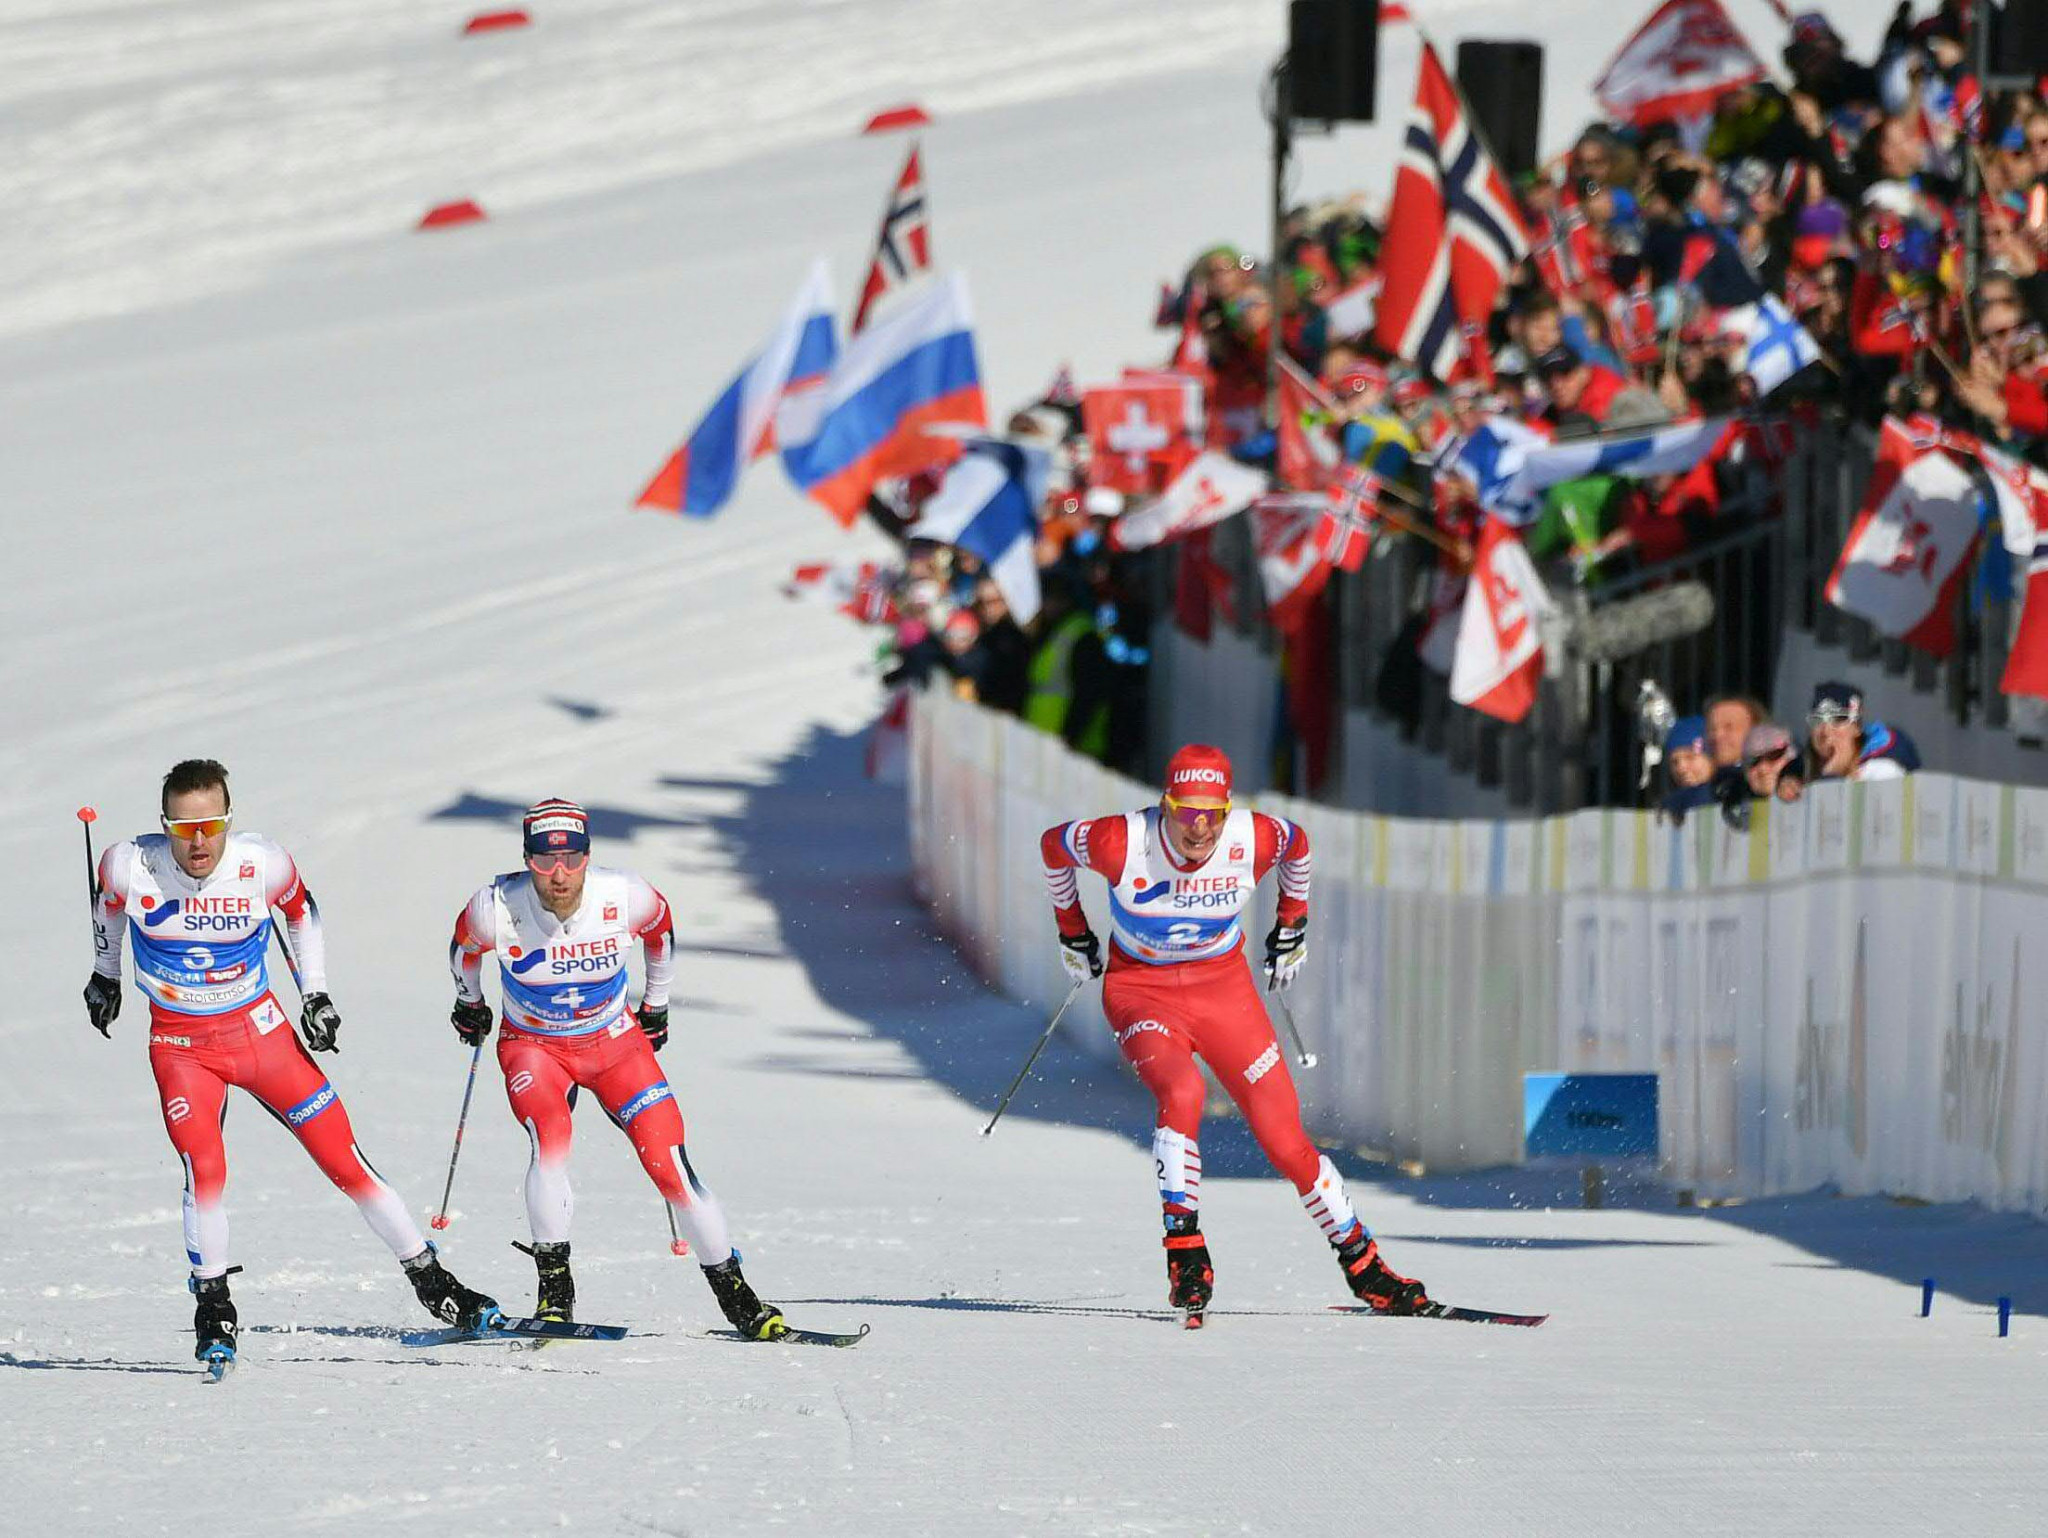 A closely contested men's 30km skiathlon competition took place ©Getty Images